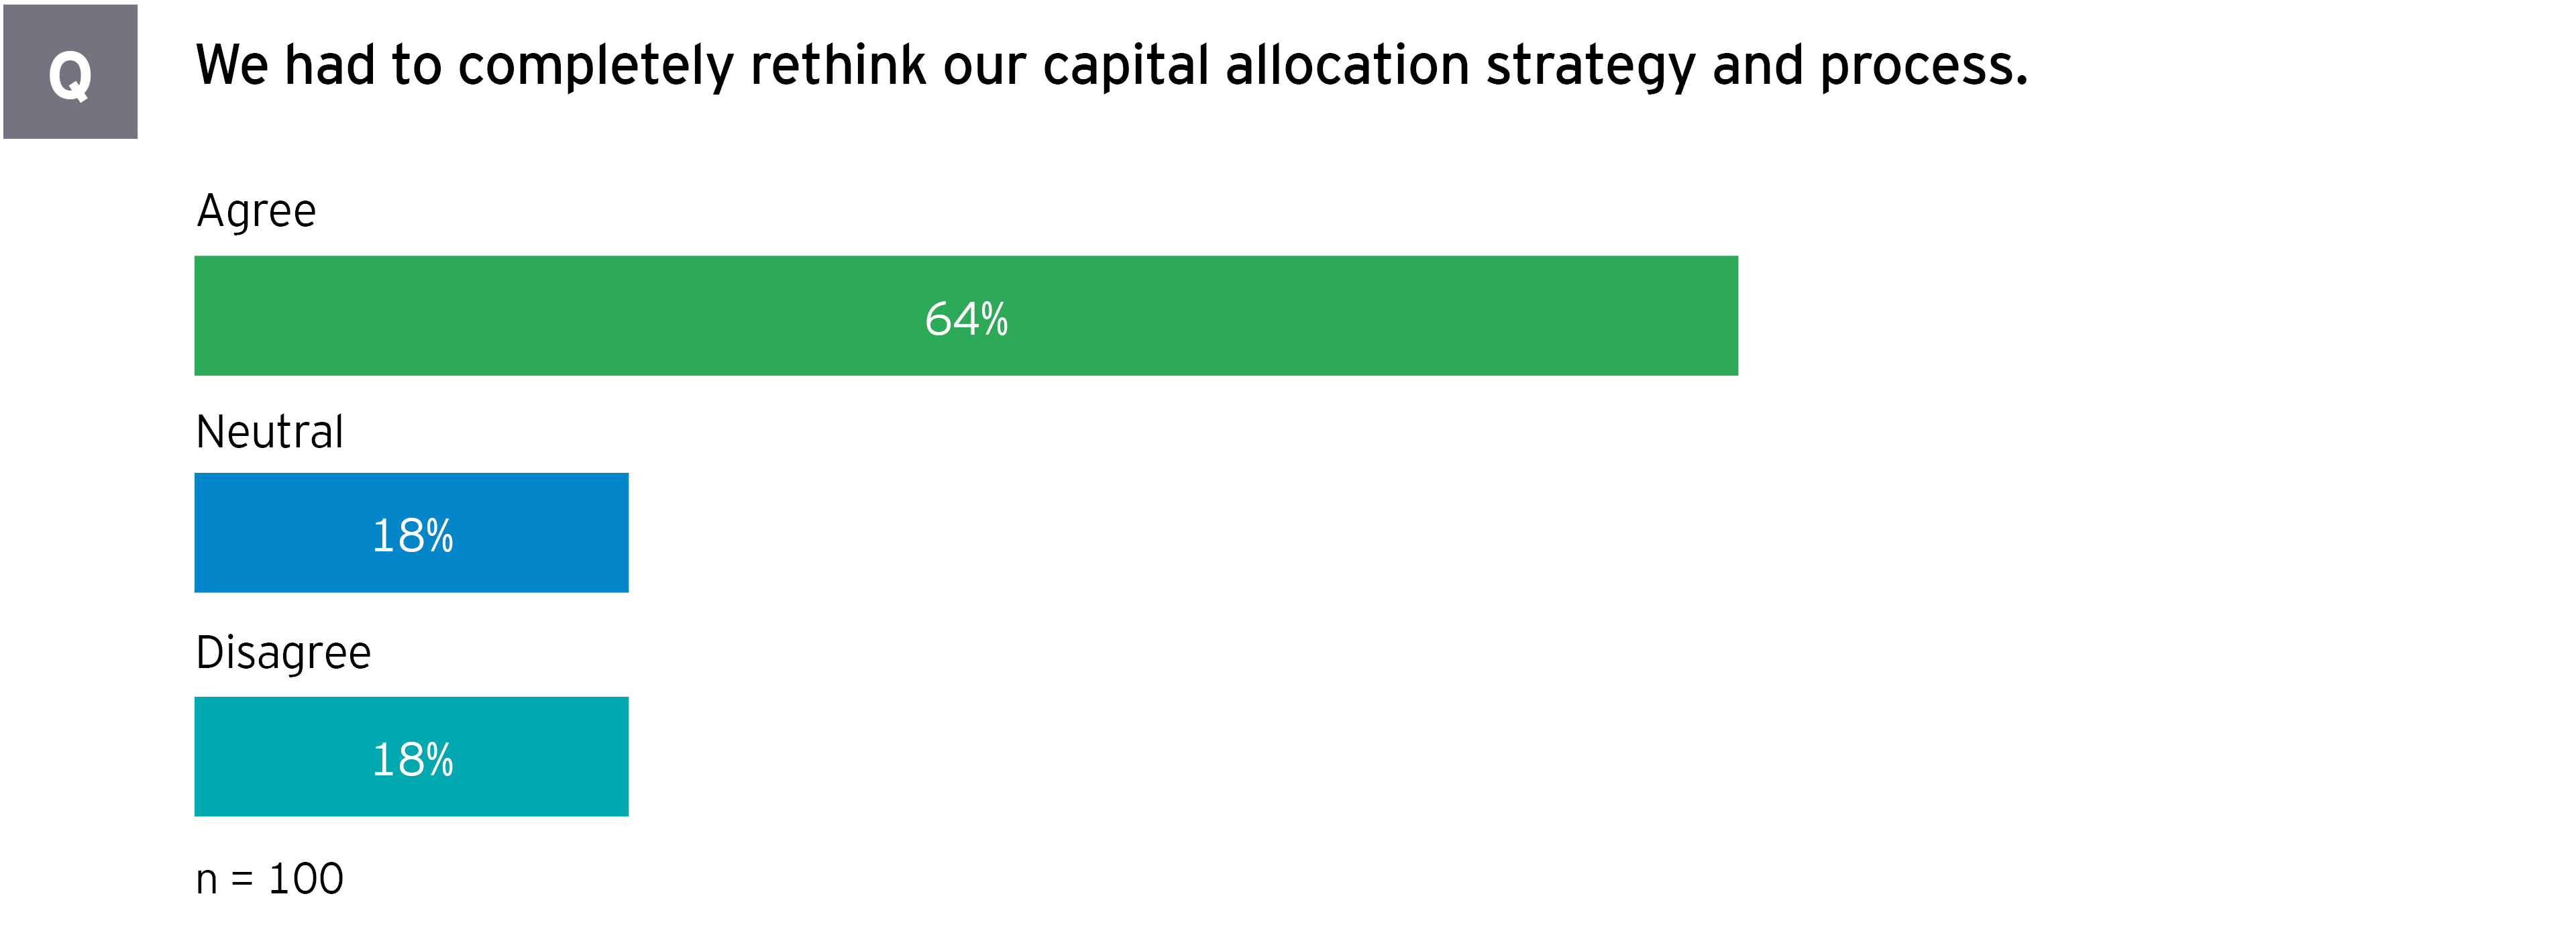 Life sciences executives rethink capital allocation strategy and process